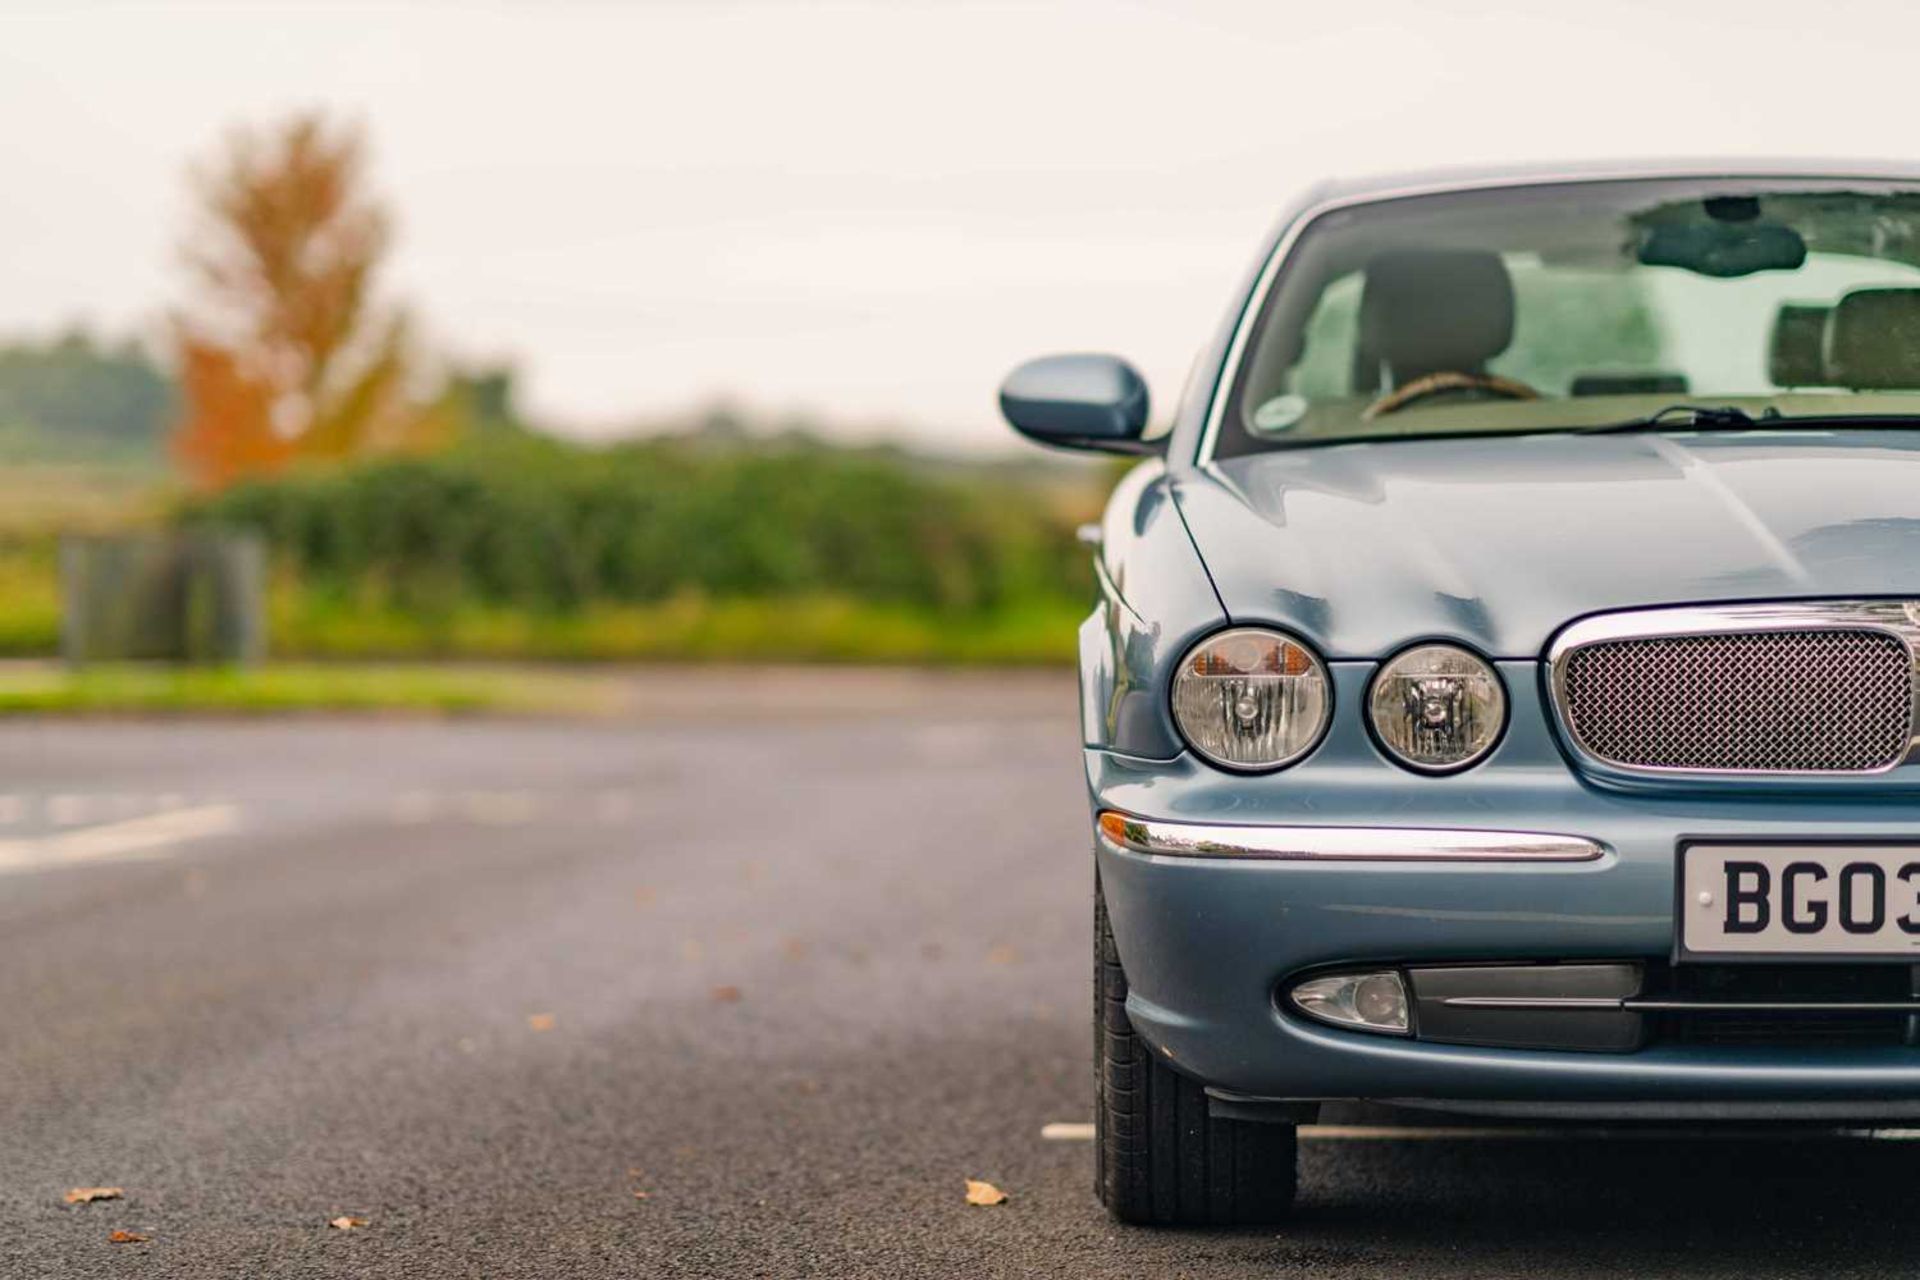 2003 Jaguar XJ8 4.2 V8 SE Range-topping 'Special Equipment' model, with a current MOT and warranted  - Image 2 of 63